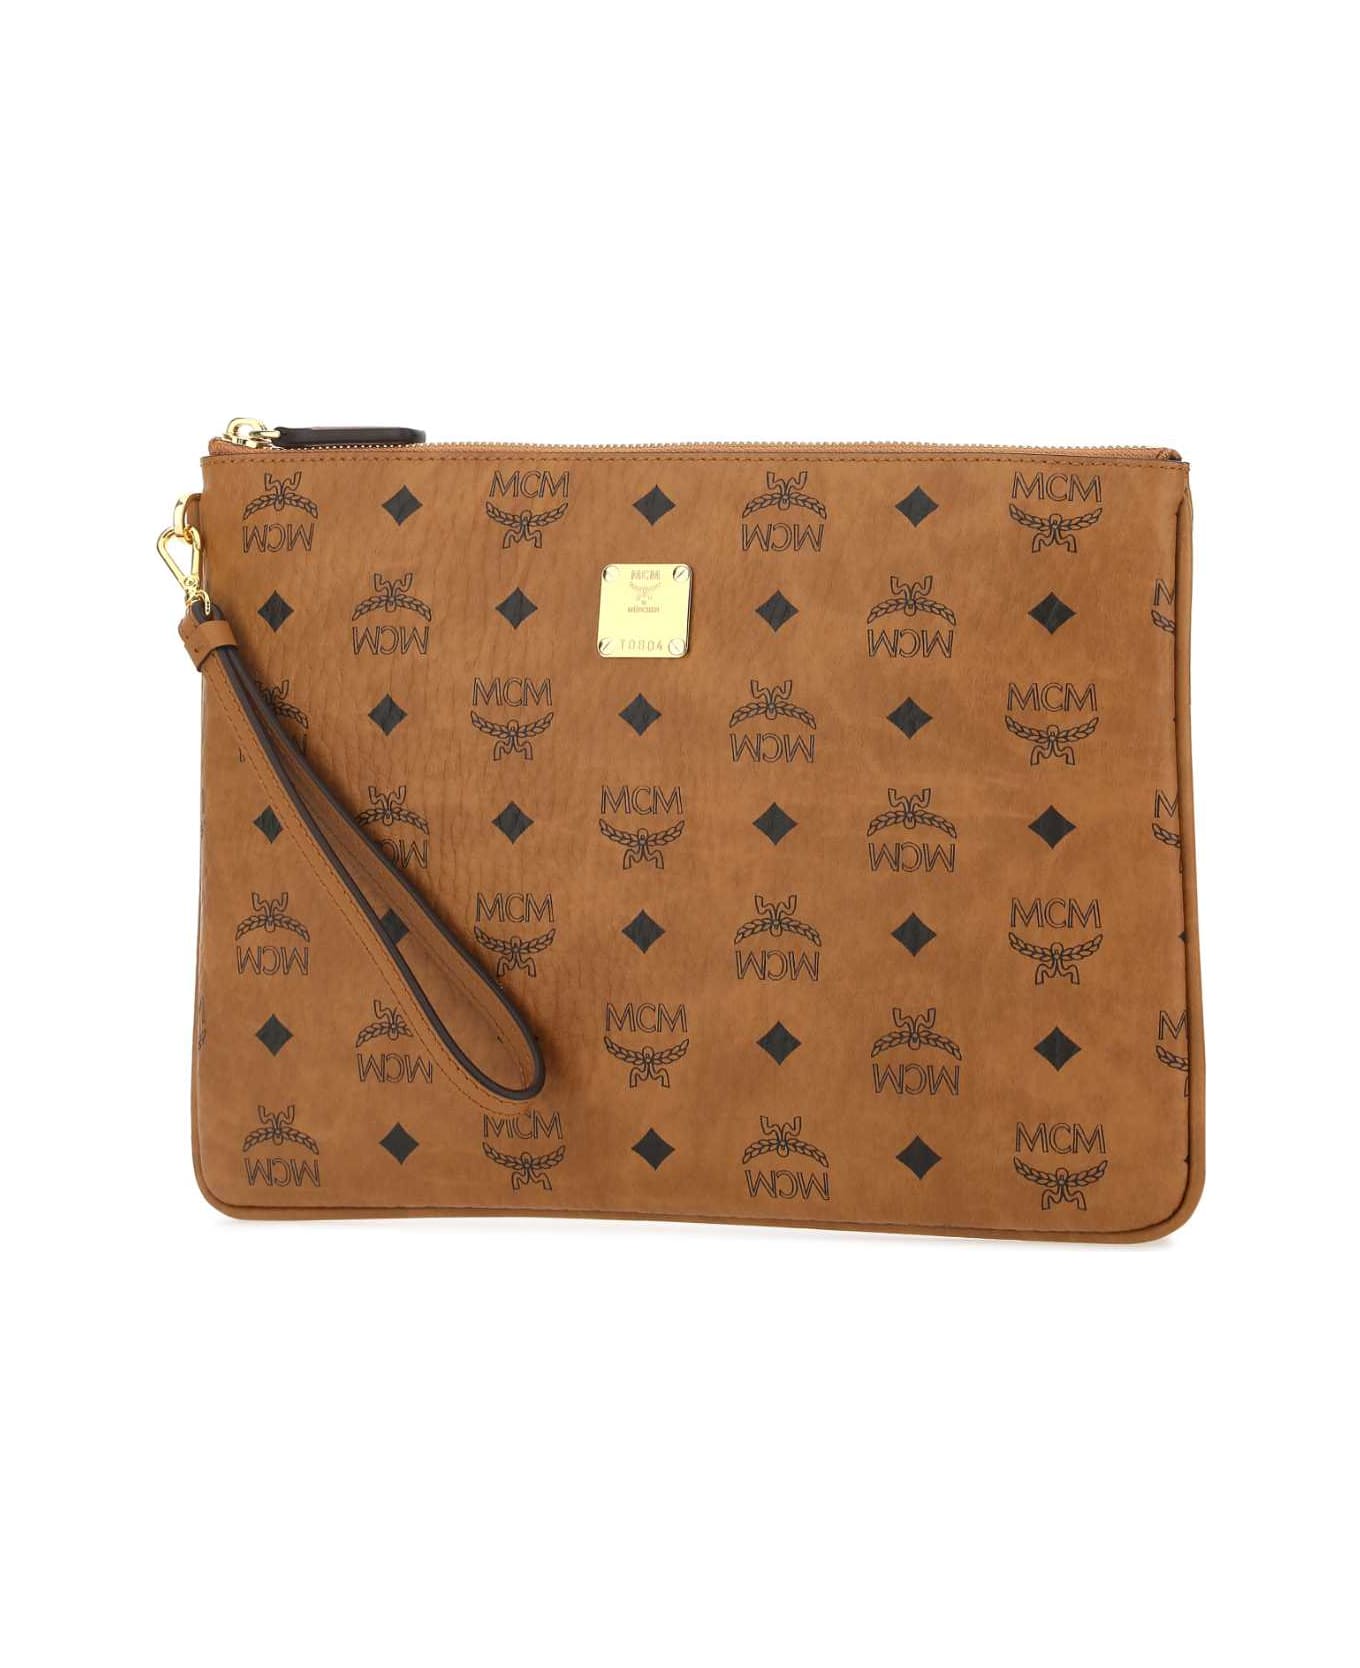 MCM Printed Canvas Clutch - CO